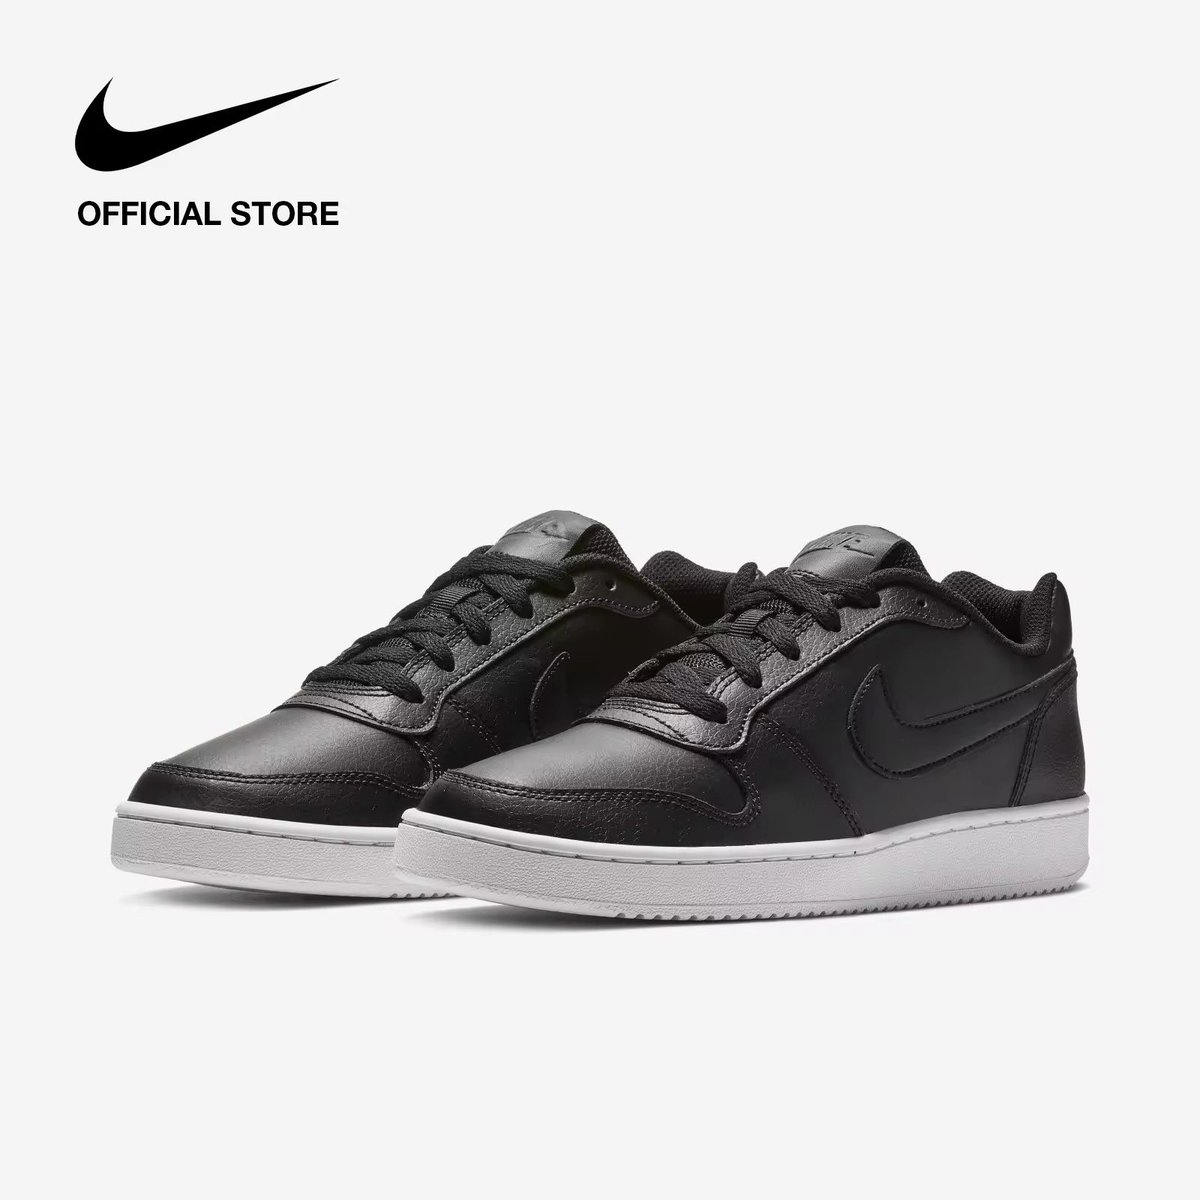 I found this #greatdeal on #Lazada! Check it out! 
Product Name:  Nike Women's Ebernon Low Shoes - Black
Product Price:  ₱3,695
s.lazada.com.ph/s.SVIya?cc